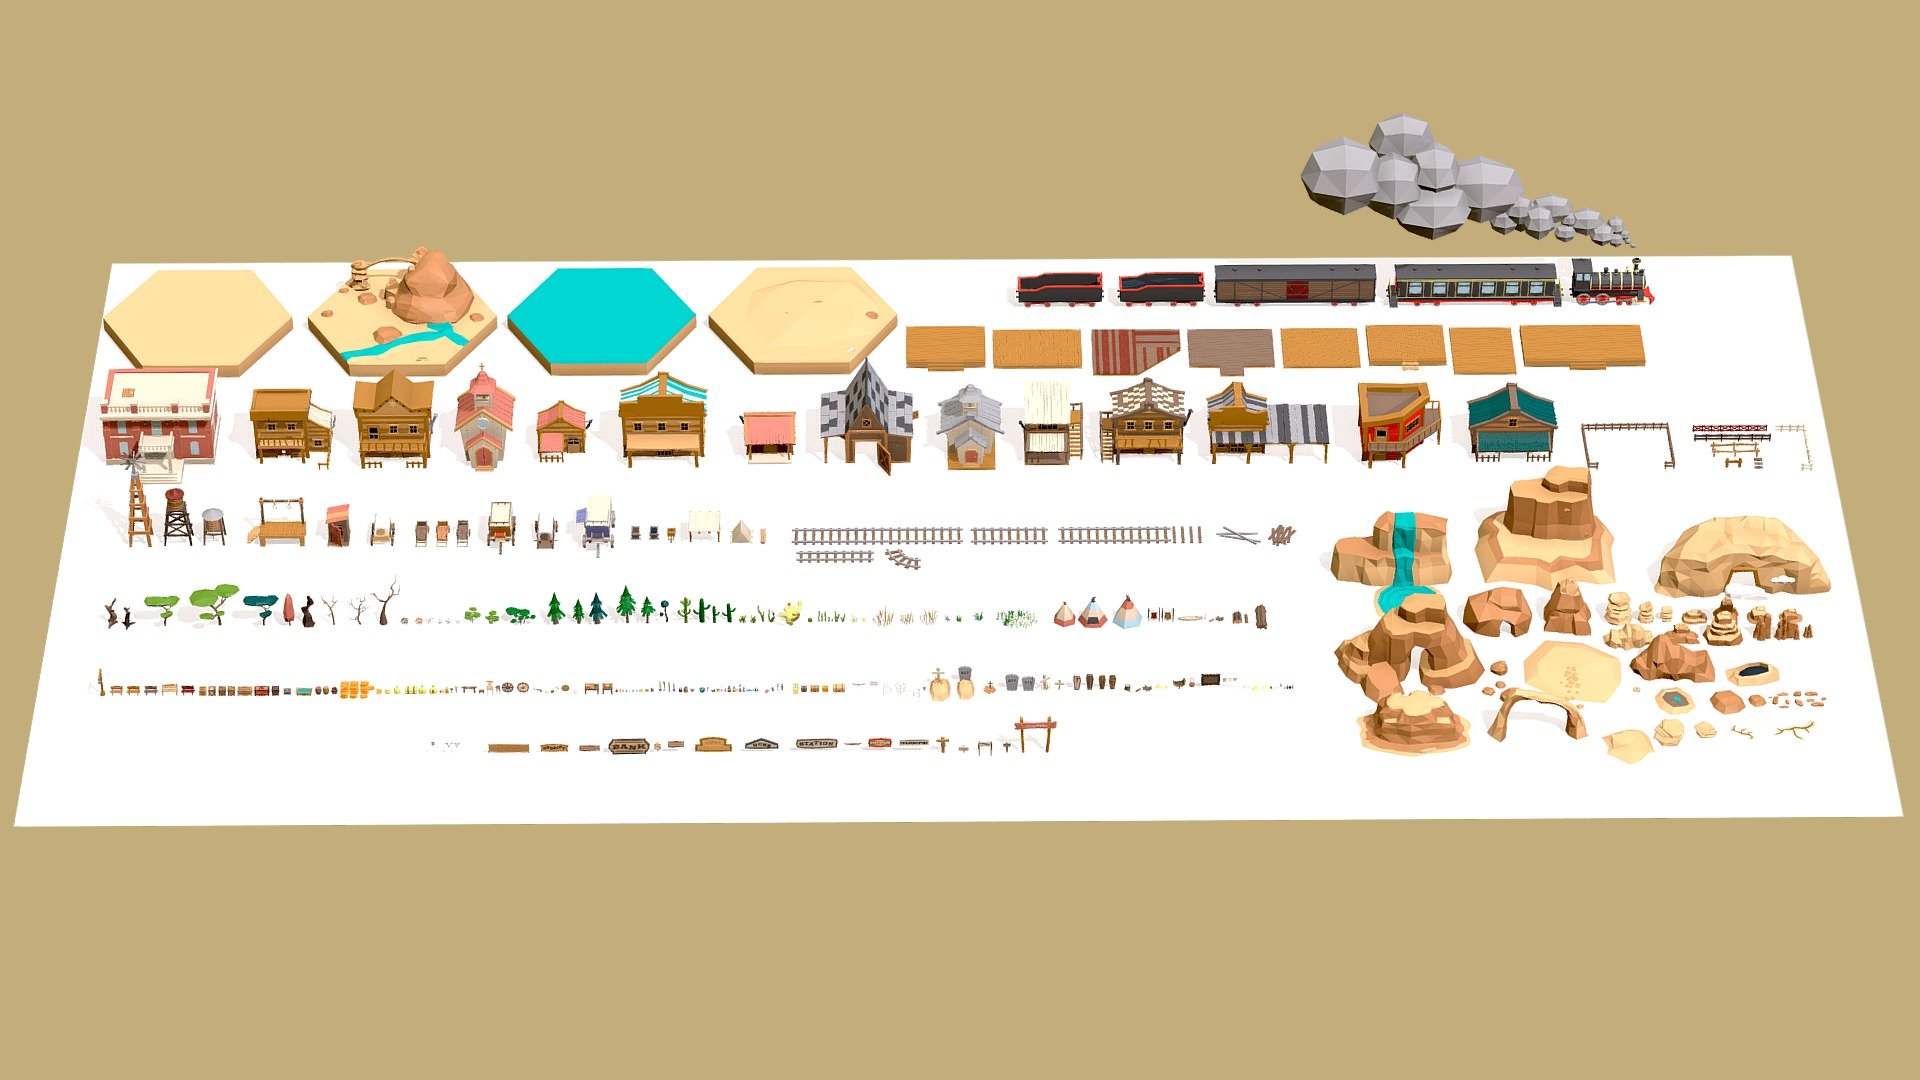 part of Low Poly Wild West Set download here

25 tiles + 330 objects

Exteriors props: 
● Buildings (saloon, trading post, hotel, railway station, gold stash, guns shop, school, sheriff, church, undertaker, toilet, bank, farm, vigvams, tent, caravan, cart)

● Landscape (mountains, hills, mine, waterfall, lake, stones, cave, puddle, cracks, pit, rocks)

● Vegetation (trees, spruces, bushes, grass, stump, cactus, tumbleweed, meadow, fern)

● Train (locomotive, freight wagons, passenger coach, mine cart, rails, station)

● Props (sign, signboards, drying skins, bottles, wheel, chairs, coffins, graves, posters, gun, fences, scrolls, shovel, broom, barrels, bags, boxes, dynamites, TNT, bones, skulls, logs and much more)

You can easily create any map that suits you by simply connecting the tiles. Pack is Real-world-size, but you can scale the objects/models to the size you need 3d model